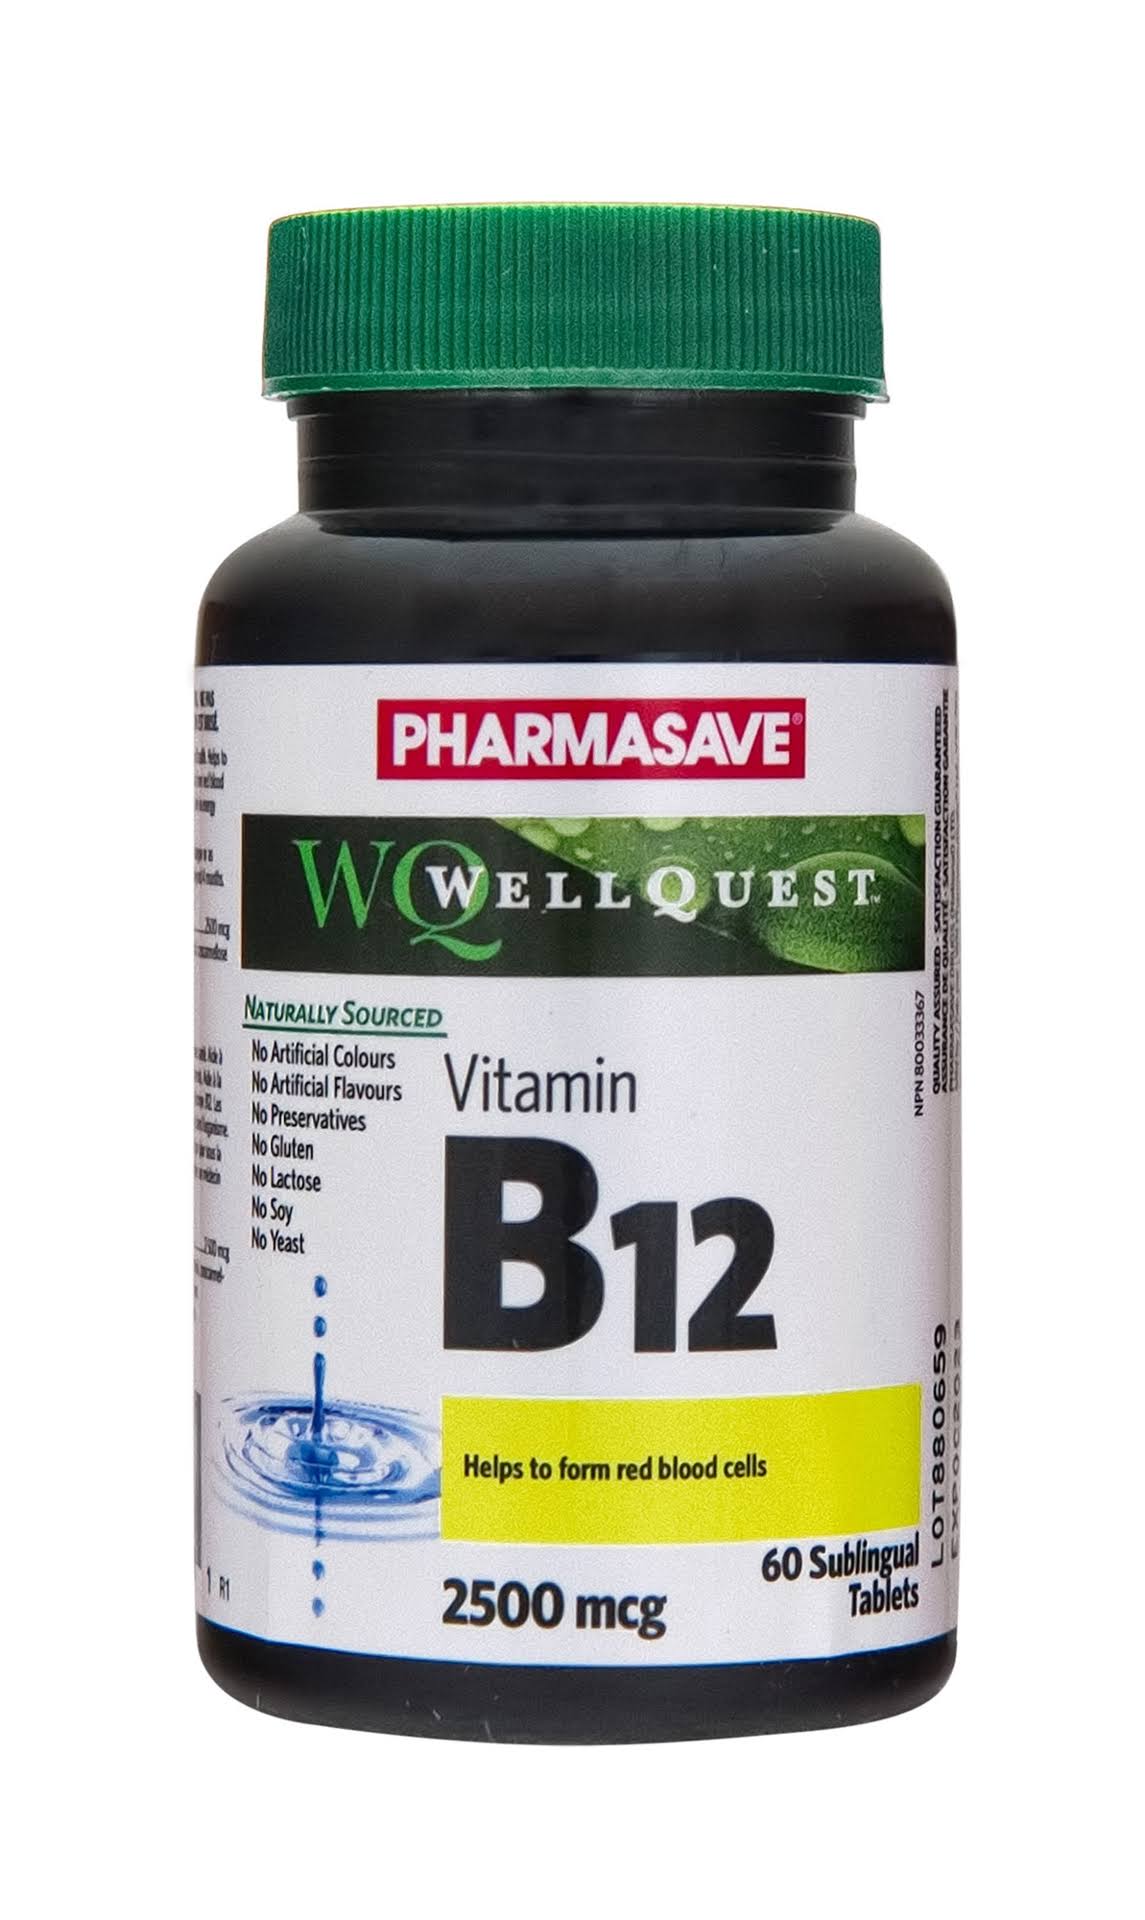 PHARMASAVE WELLQUEST VITAMIN B12 SUBLINGUAL TABLETS 2500MCG 60S